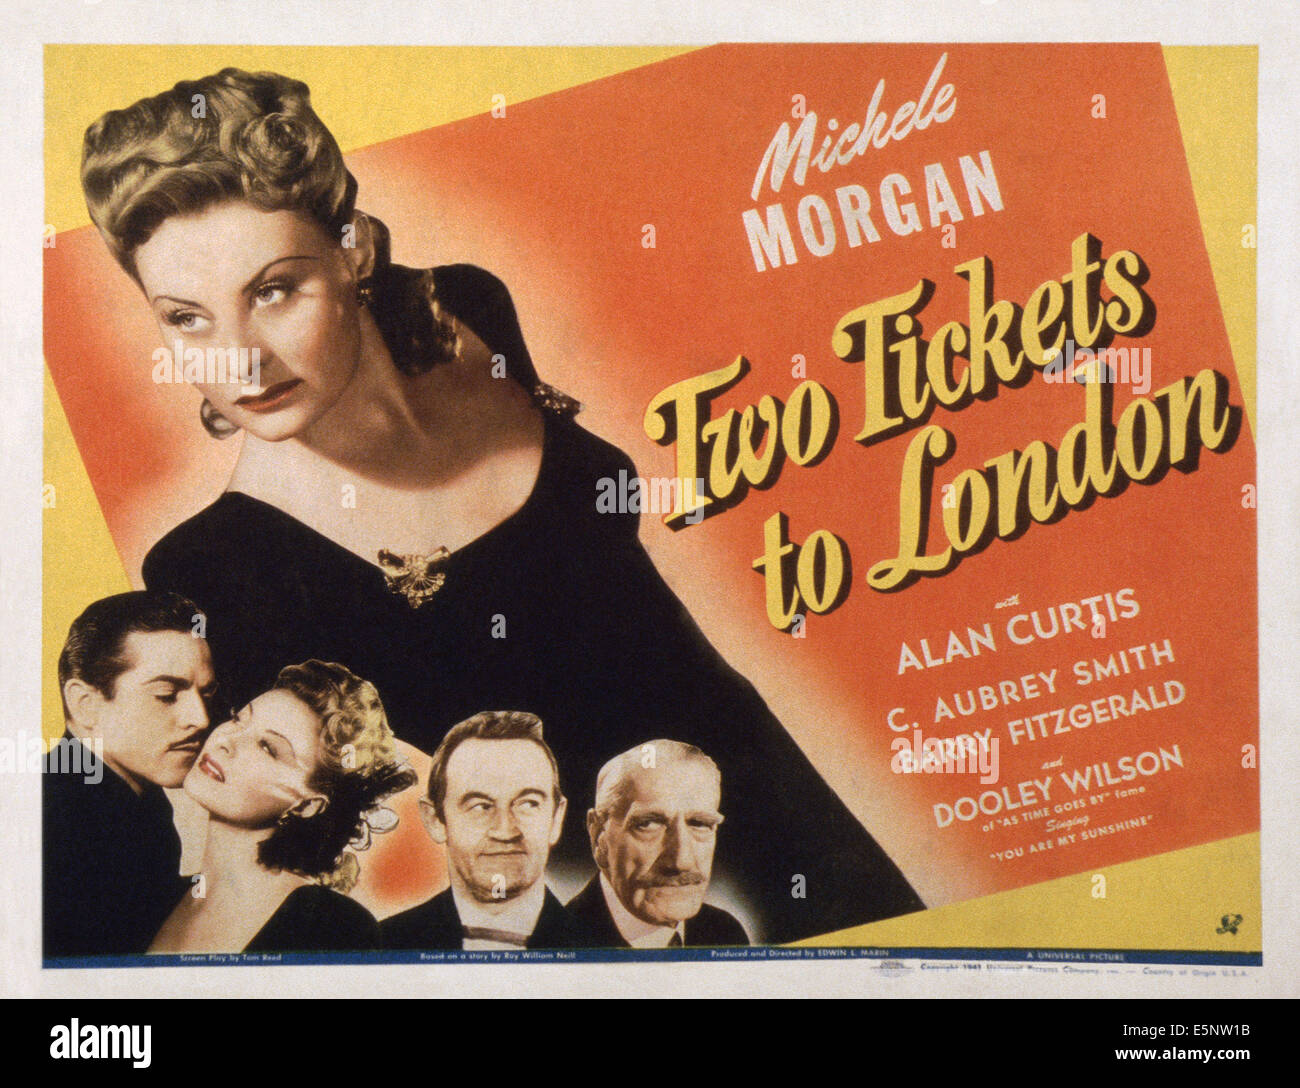 TWO TICKETS TO LONDON, US poster art, from left: Alan Curtis, Michele ...